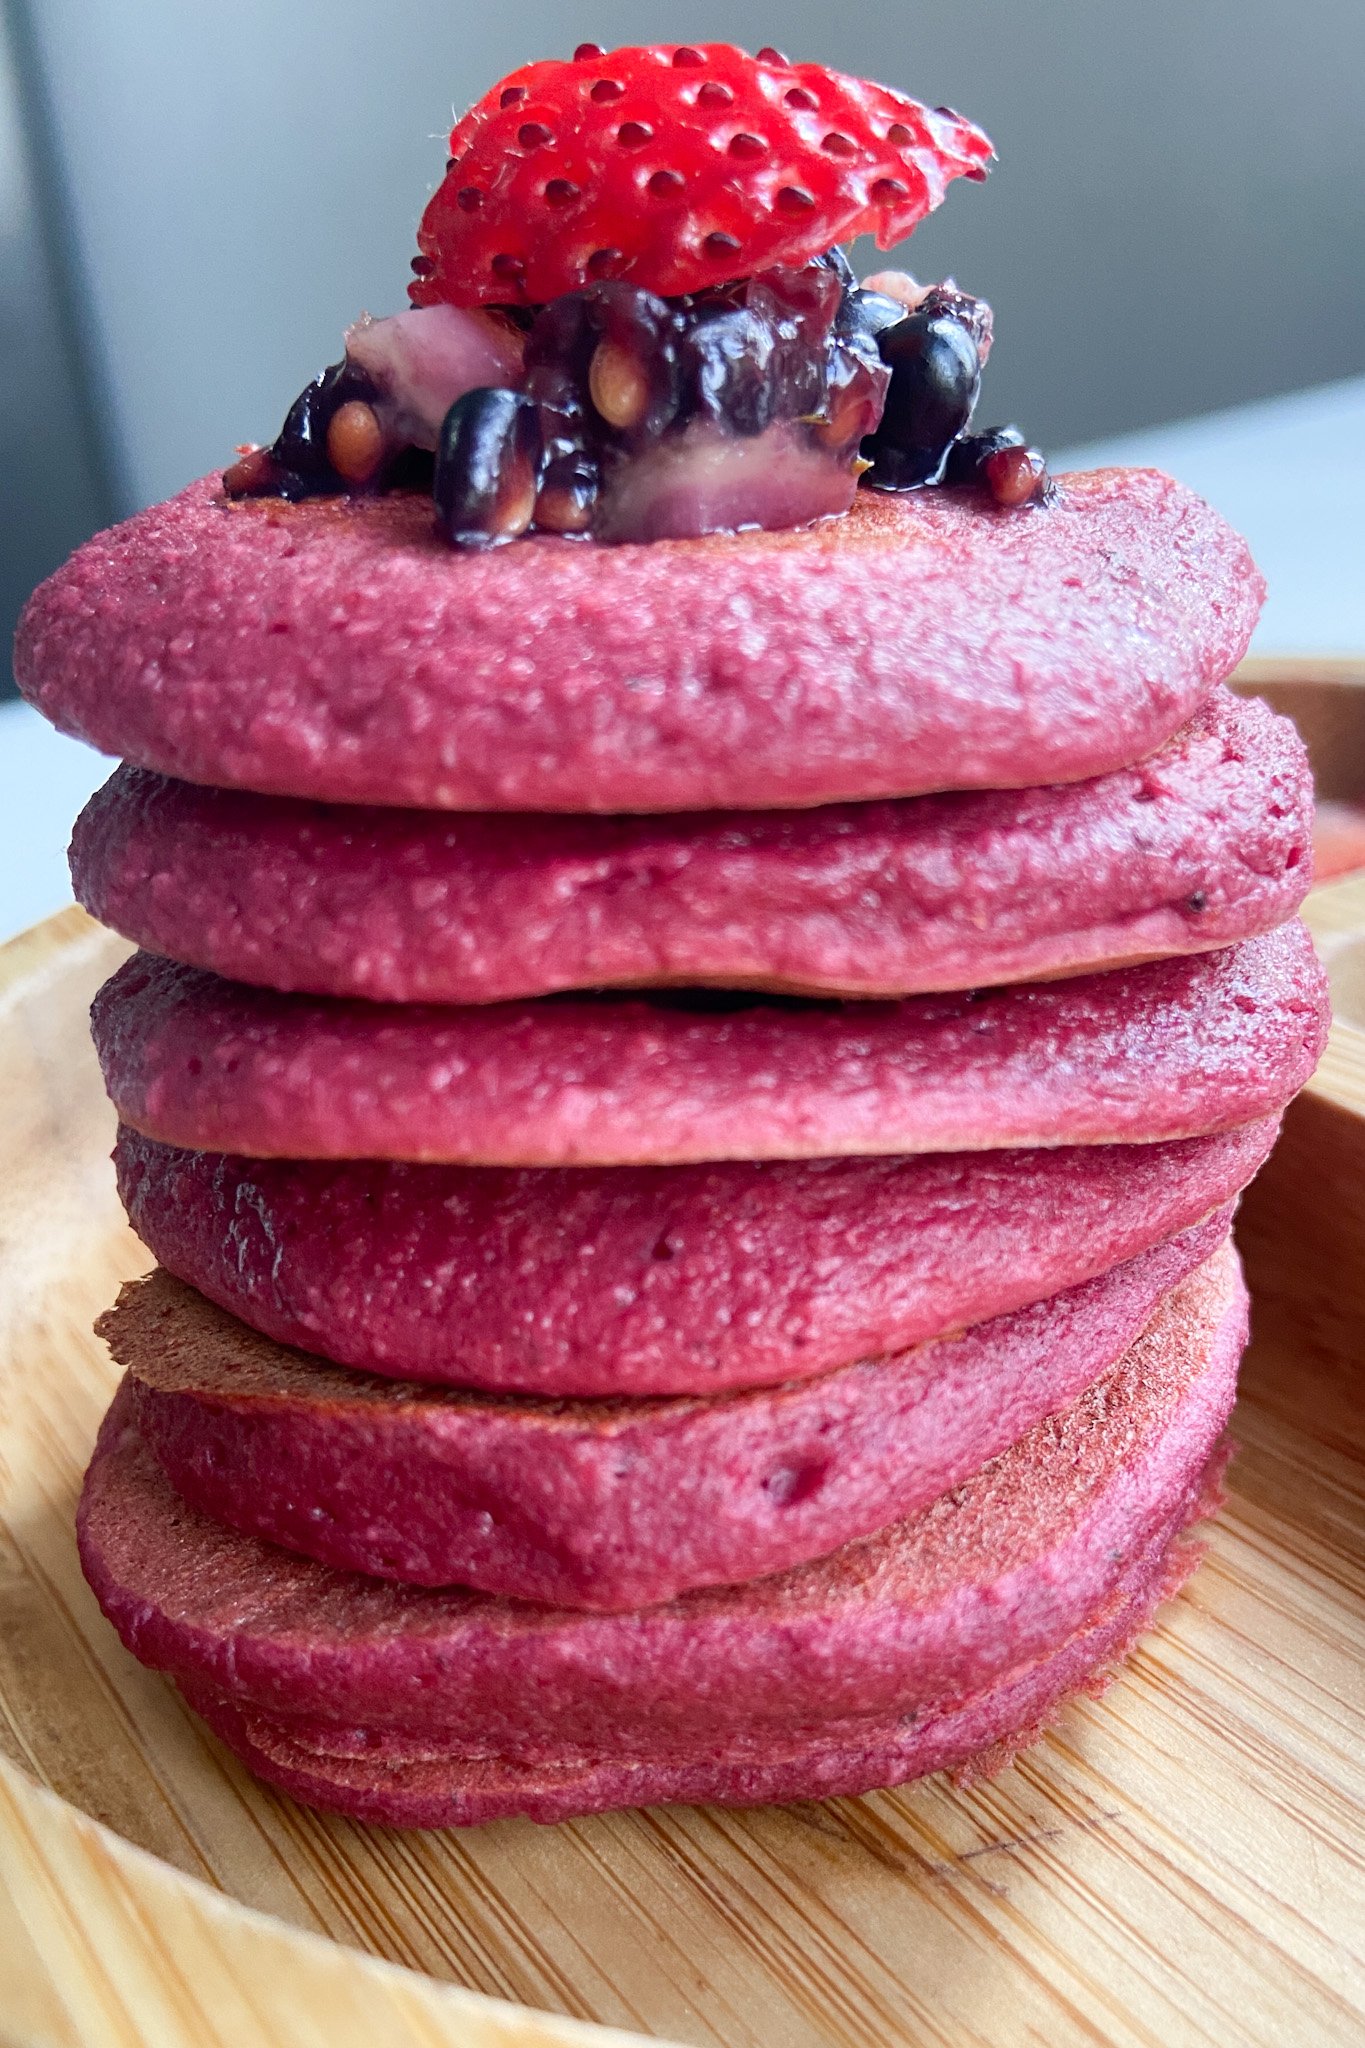 Beet banana pancakes topped with crushed blackberries and sliced strawberries